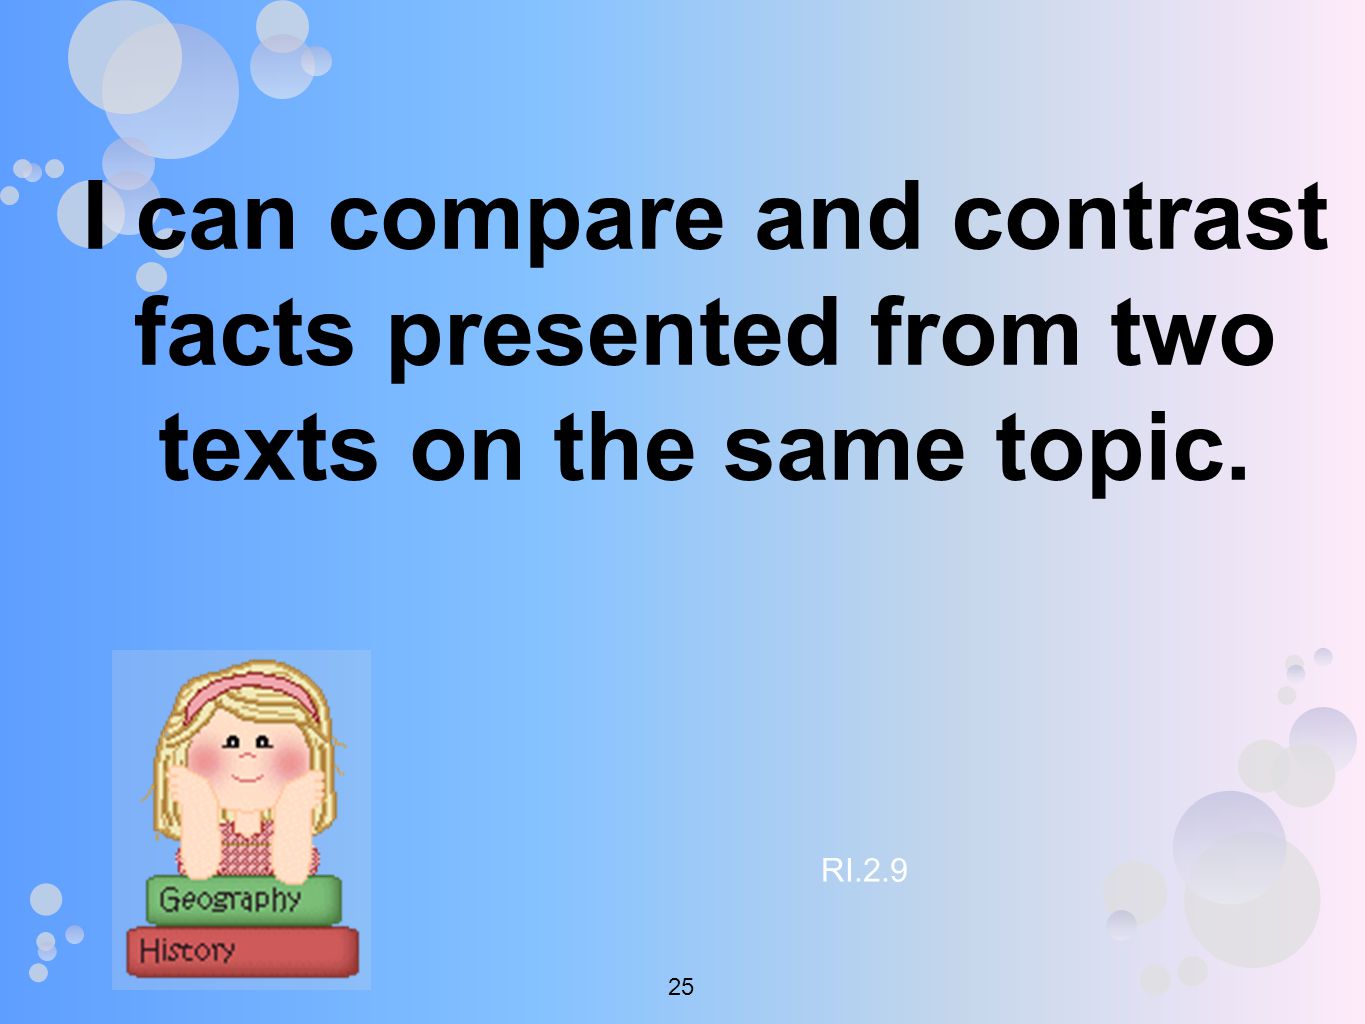 I can compare and contrast facts presented from two texts on the same topic. RI